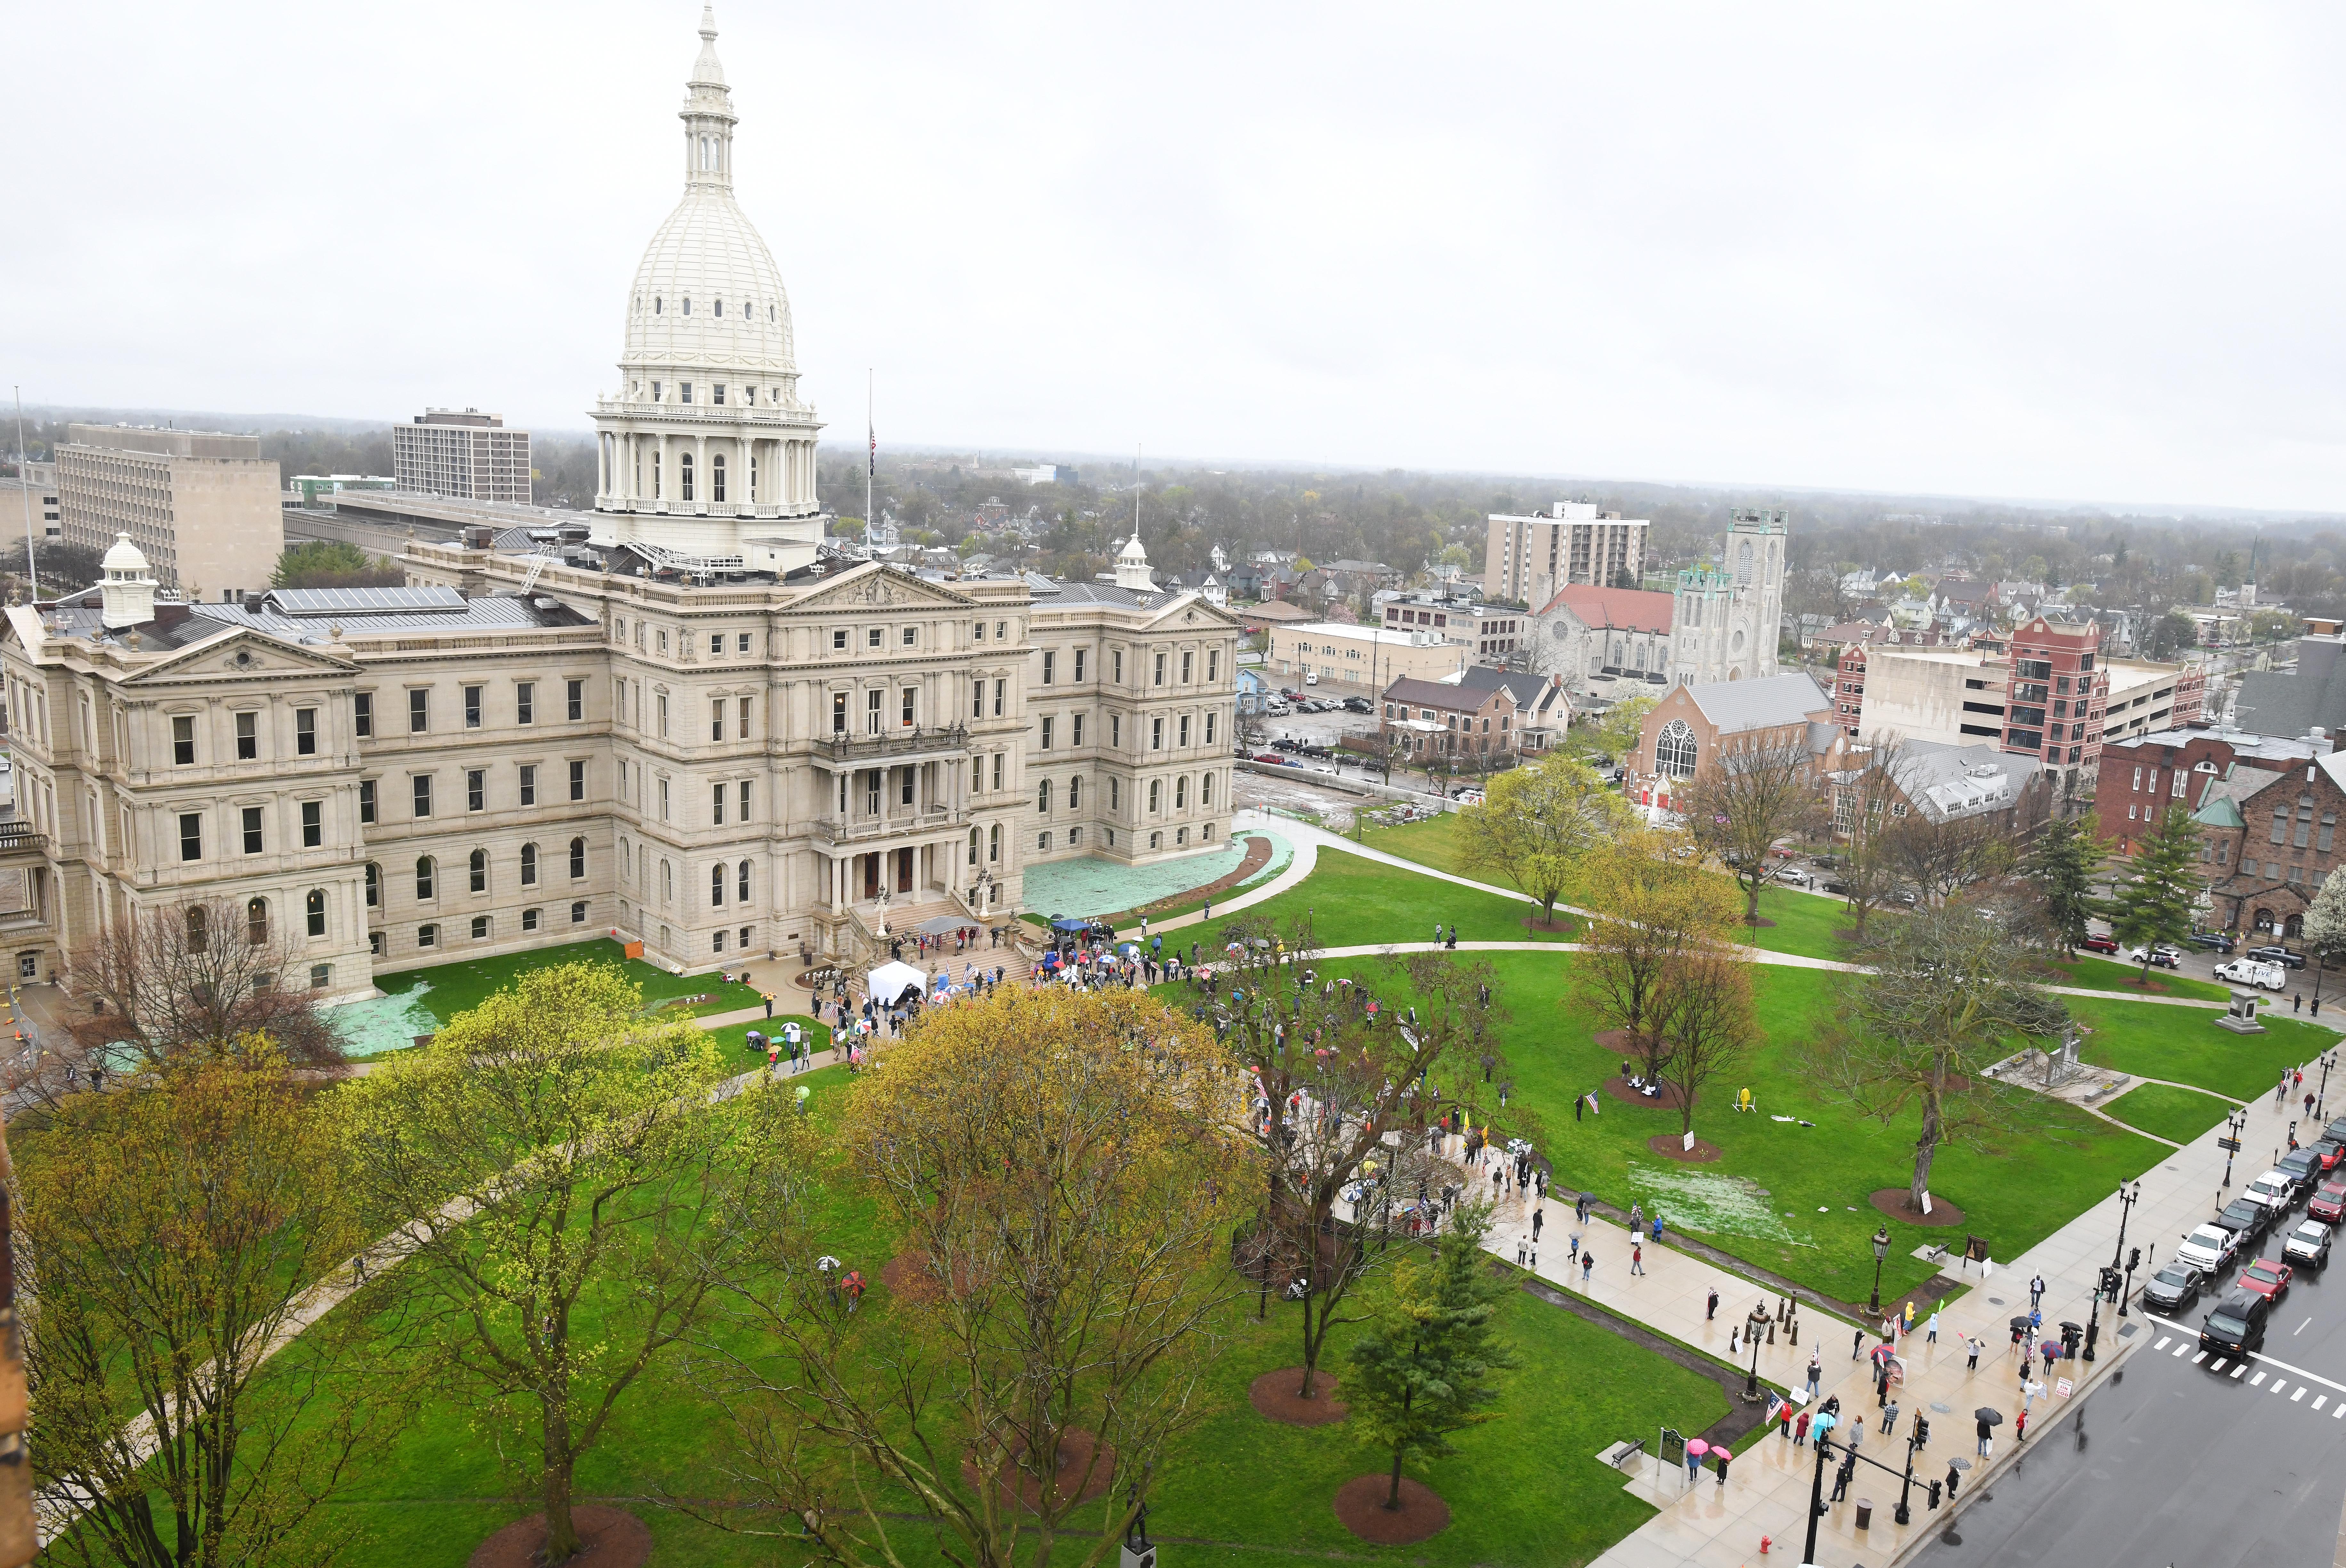 " American Patriot Rally, " in protest to Gov. Gretchen Whitmer ' s coronavirus pandemic polices, on the Michigan Capitol steps and lawn in Lansing on April 30, 2020.